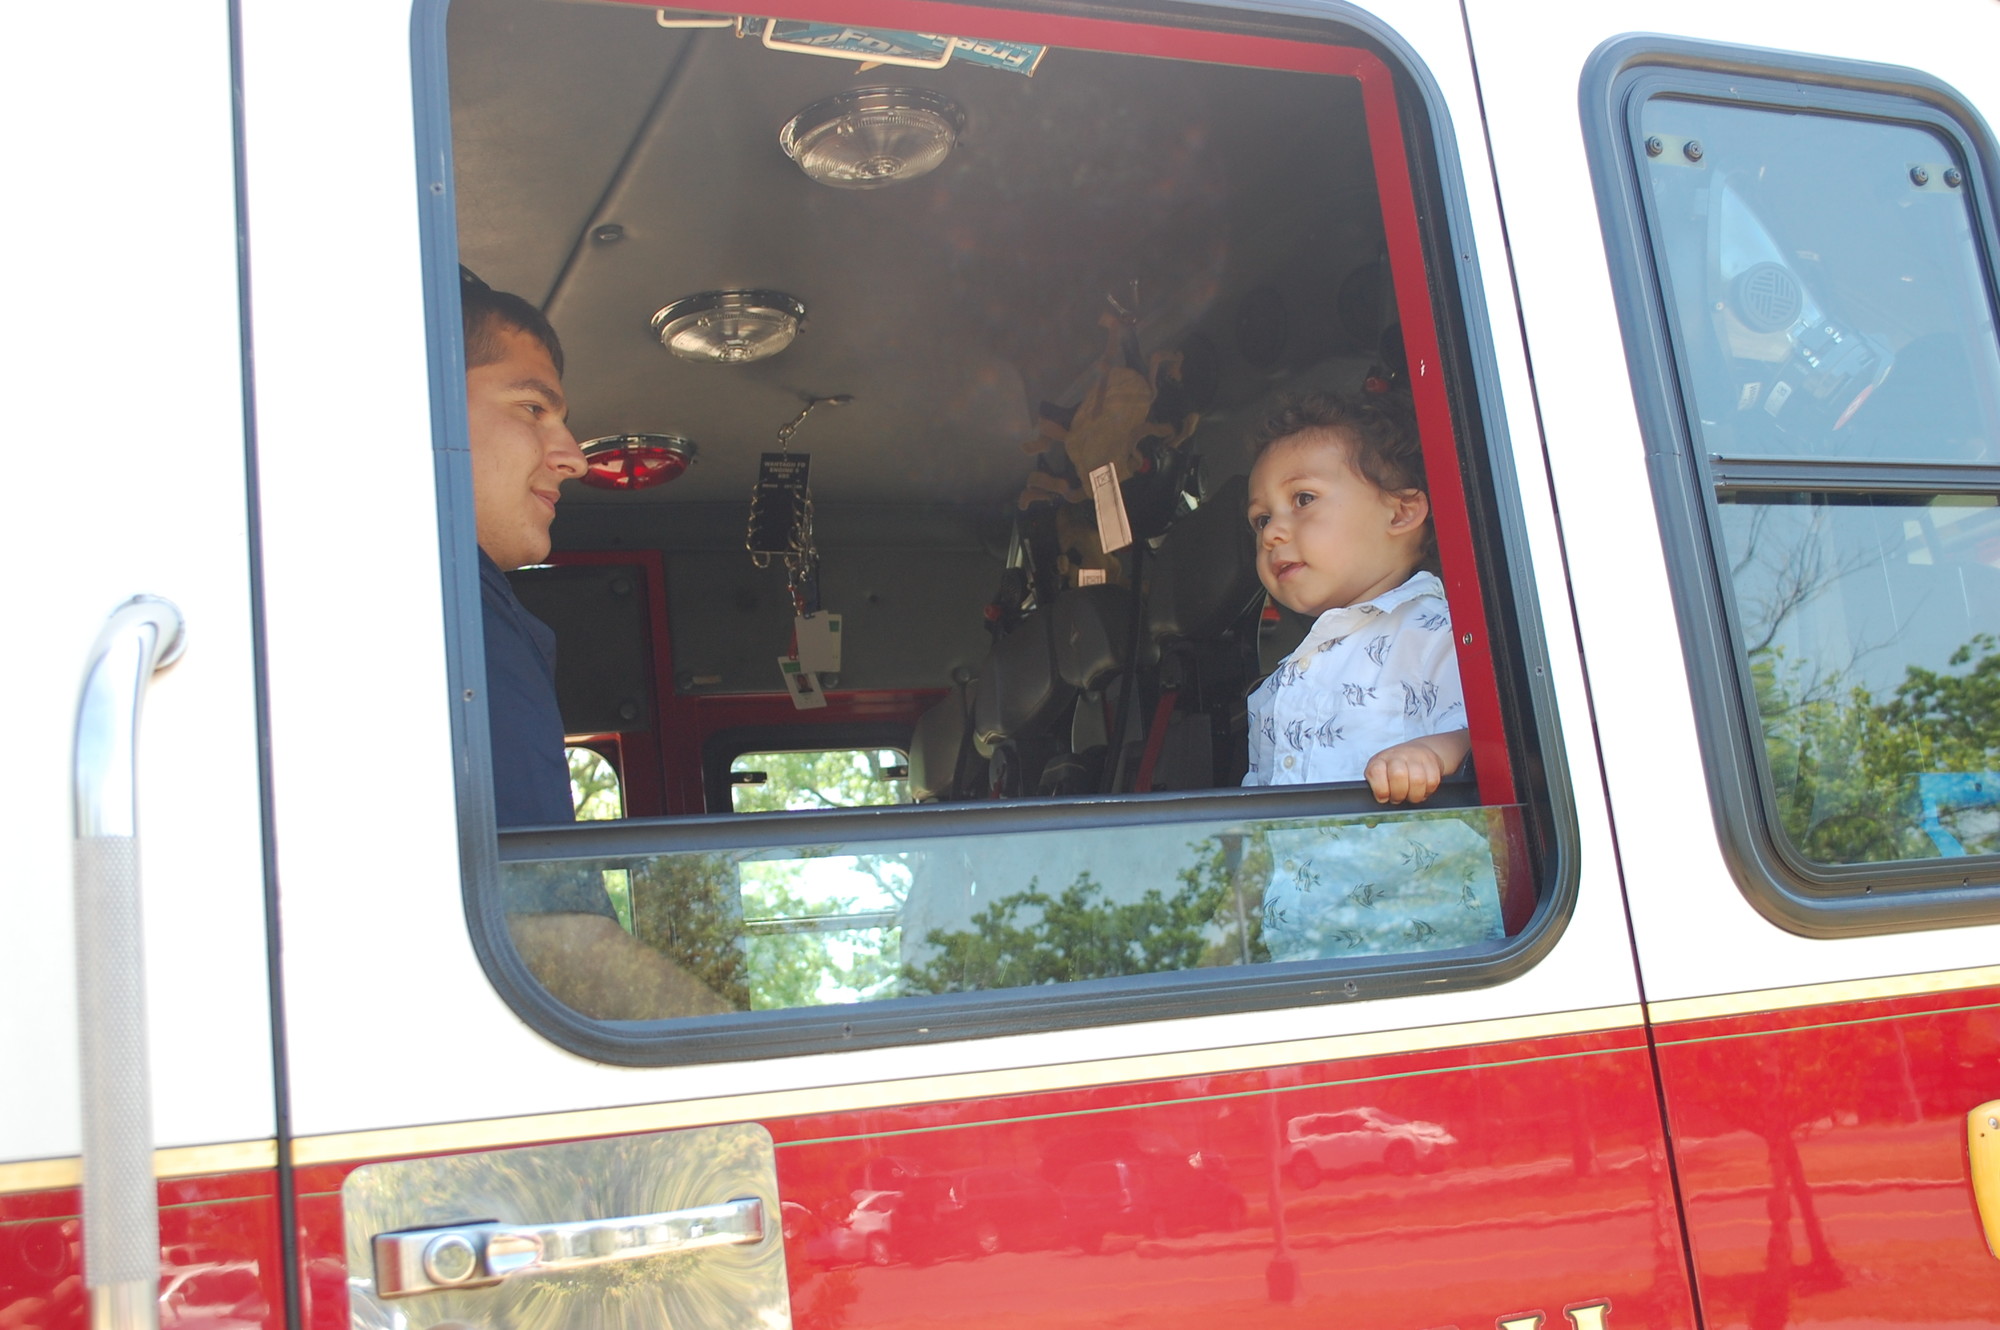 Zander Divanna, 2, got to sit in a Wantagh fire truck along with Tyler Jaros, a member of Engine Company No. 5.